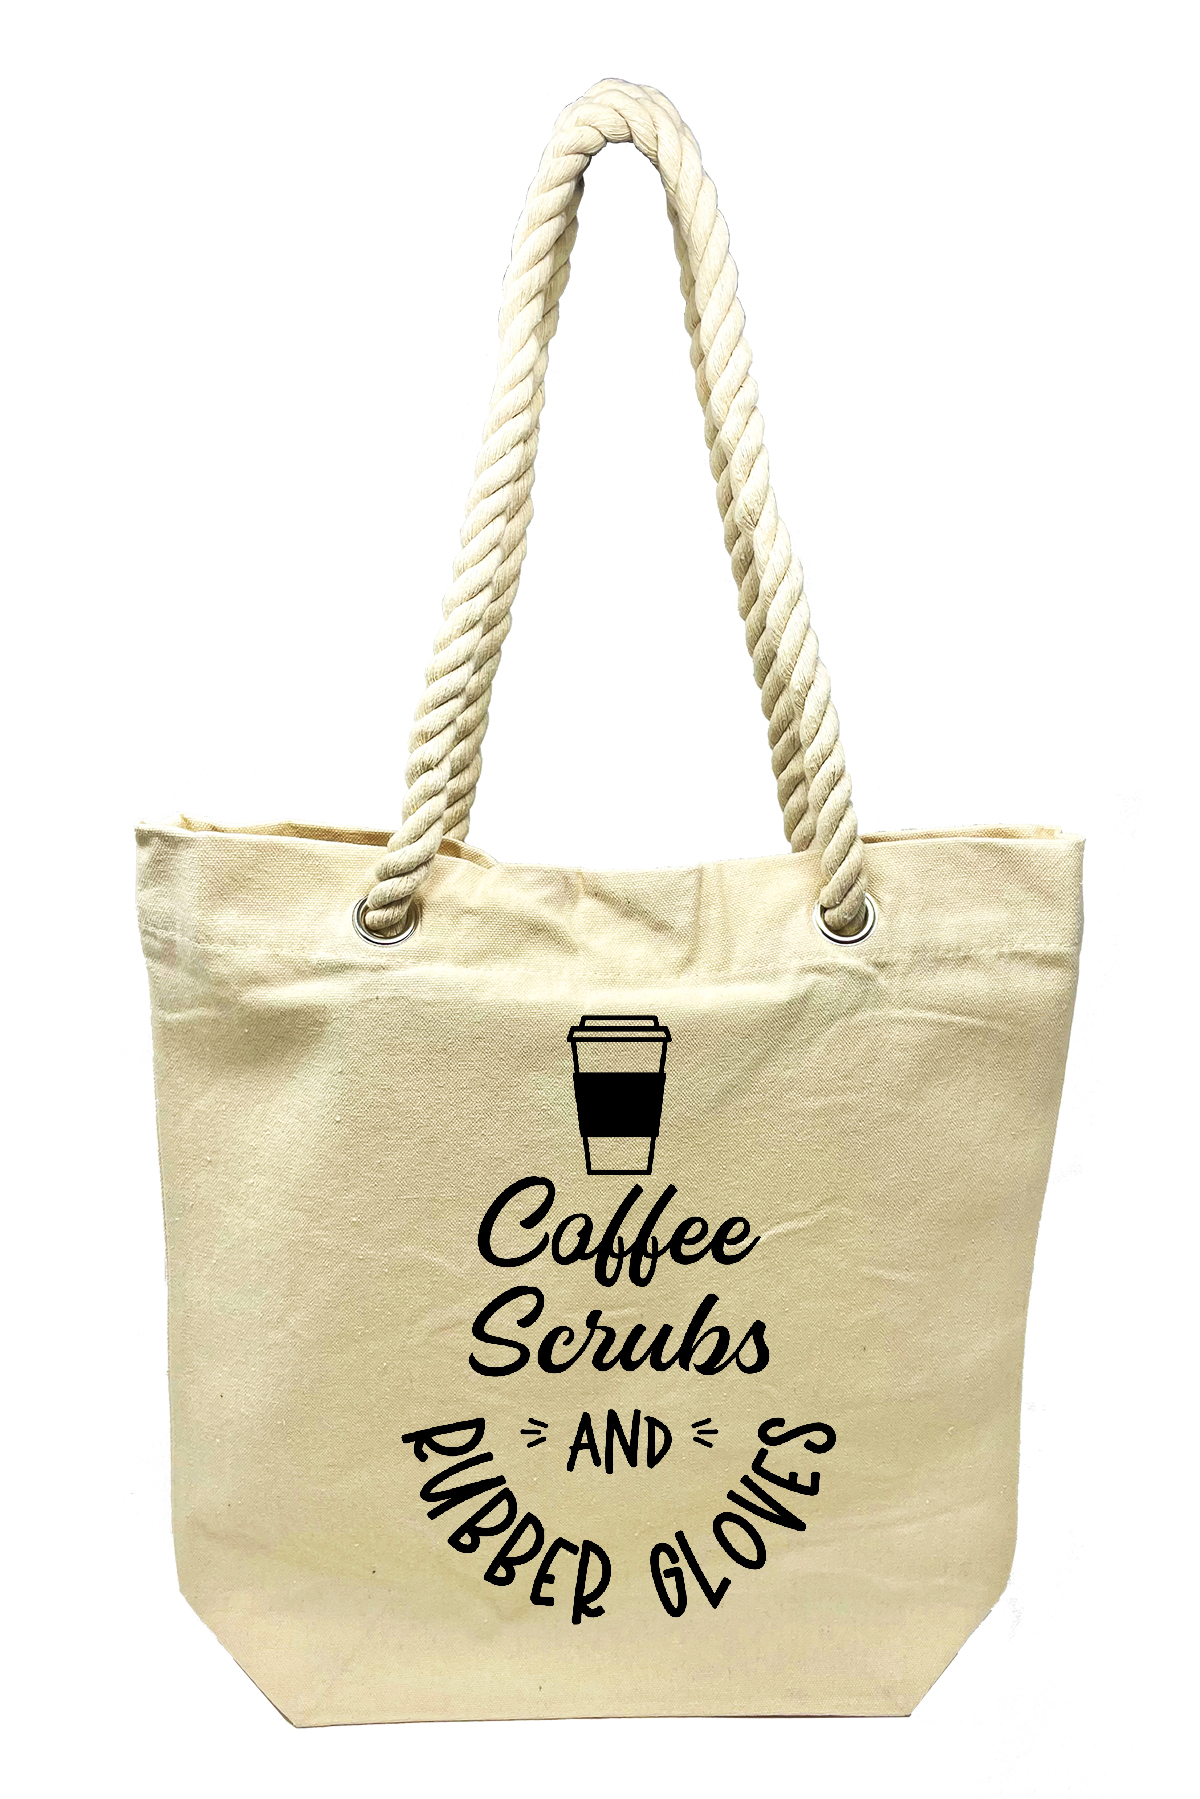 Coffee Scrubs and Rubber Gloves - Canvas Tote Bag-Cutieful